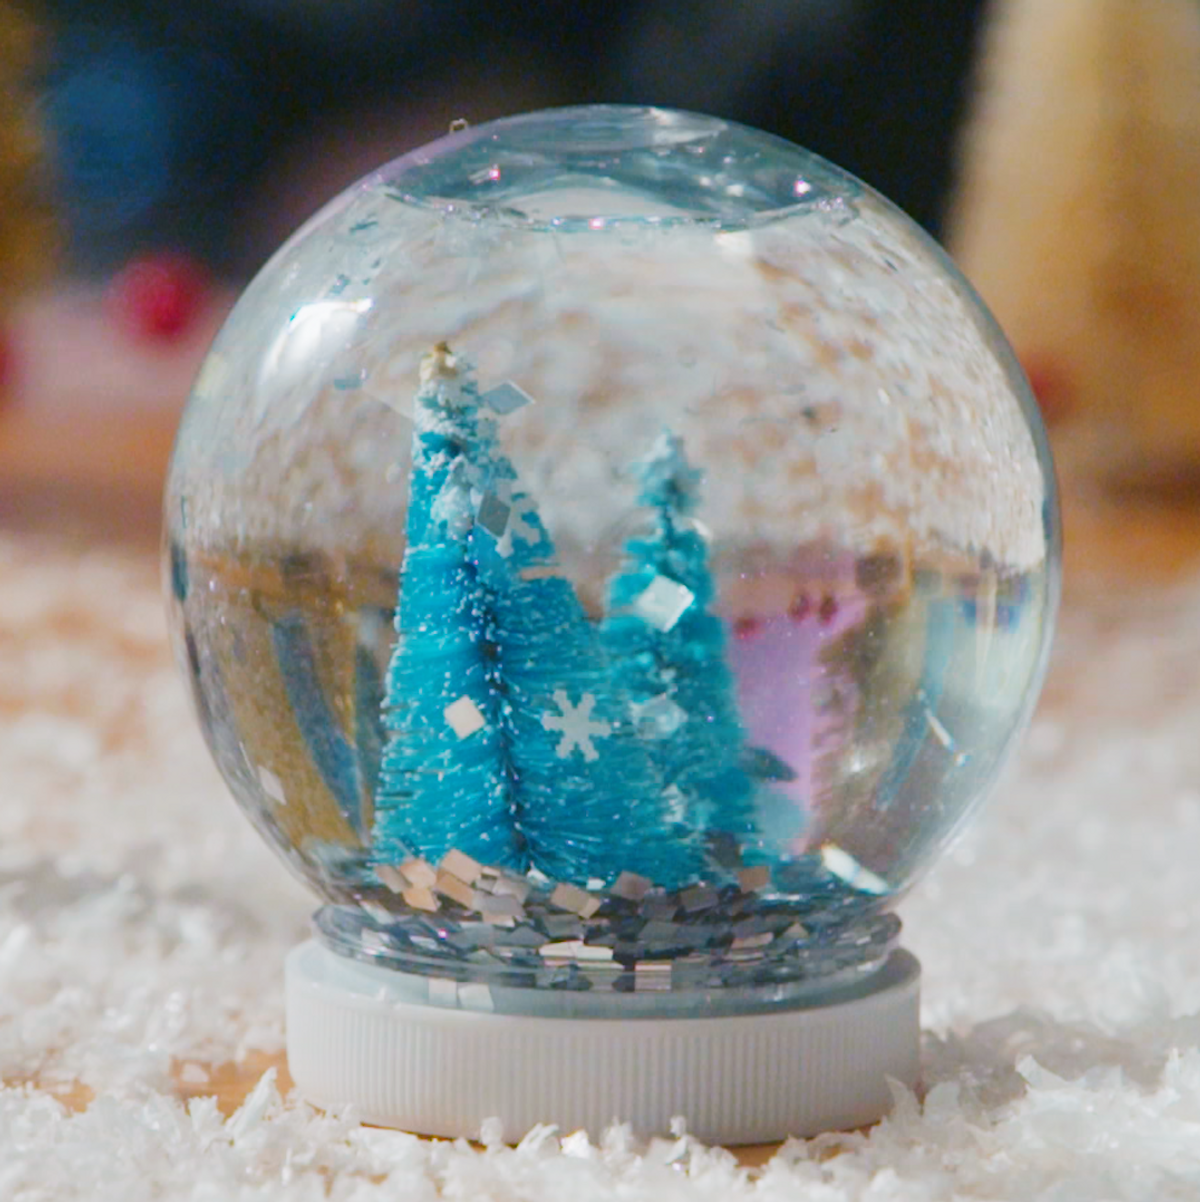 Let It Snow With This Easy Holiday Snow Globe Tutorial